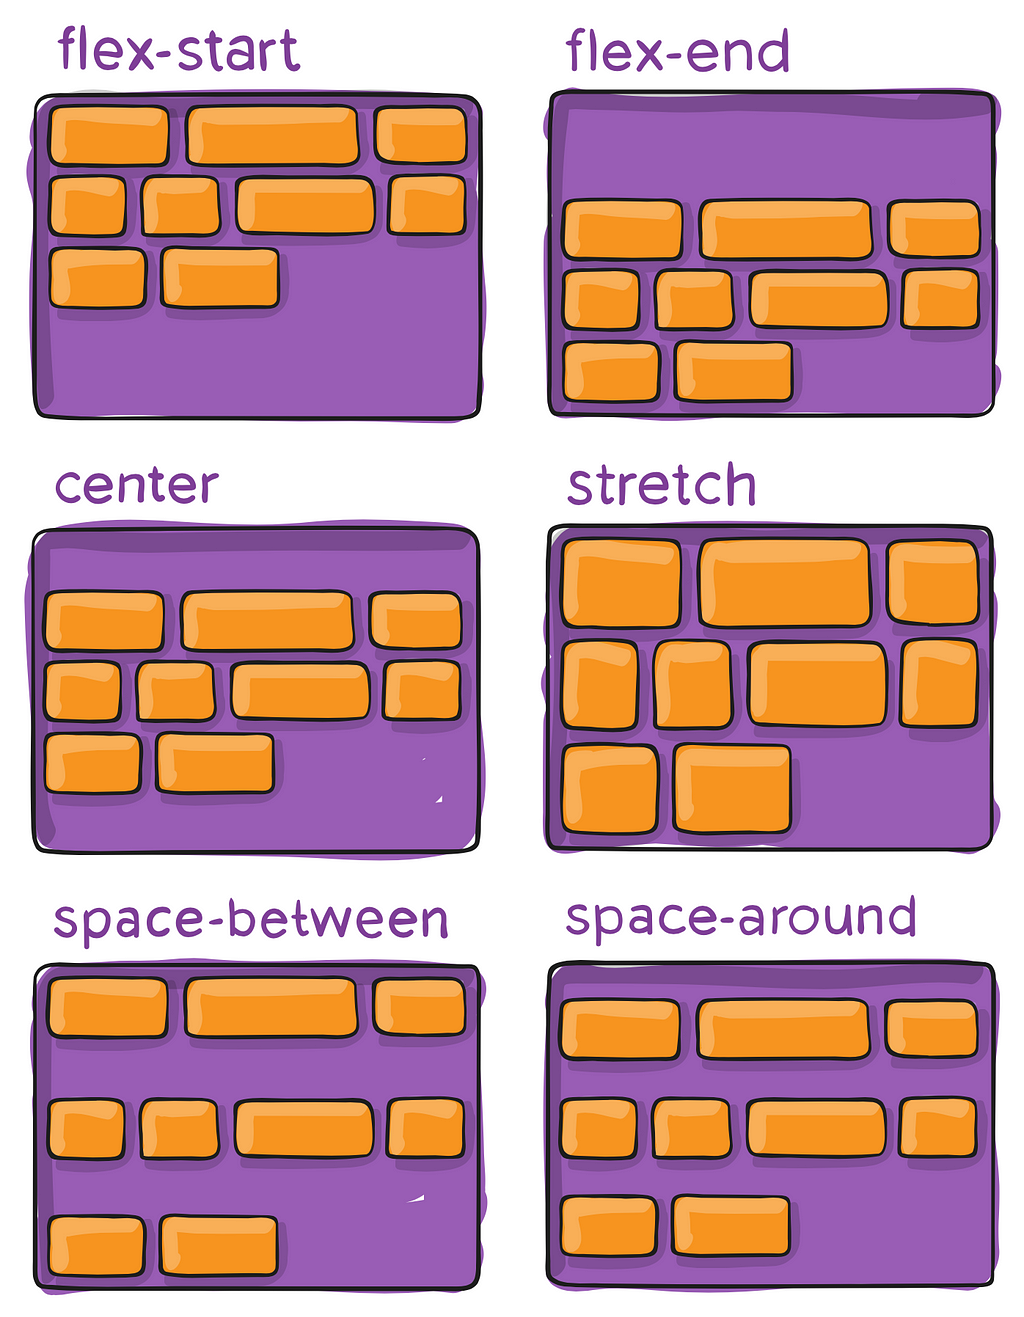 A flexbox alignment tutorial from CSS Tricks.